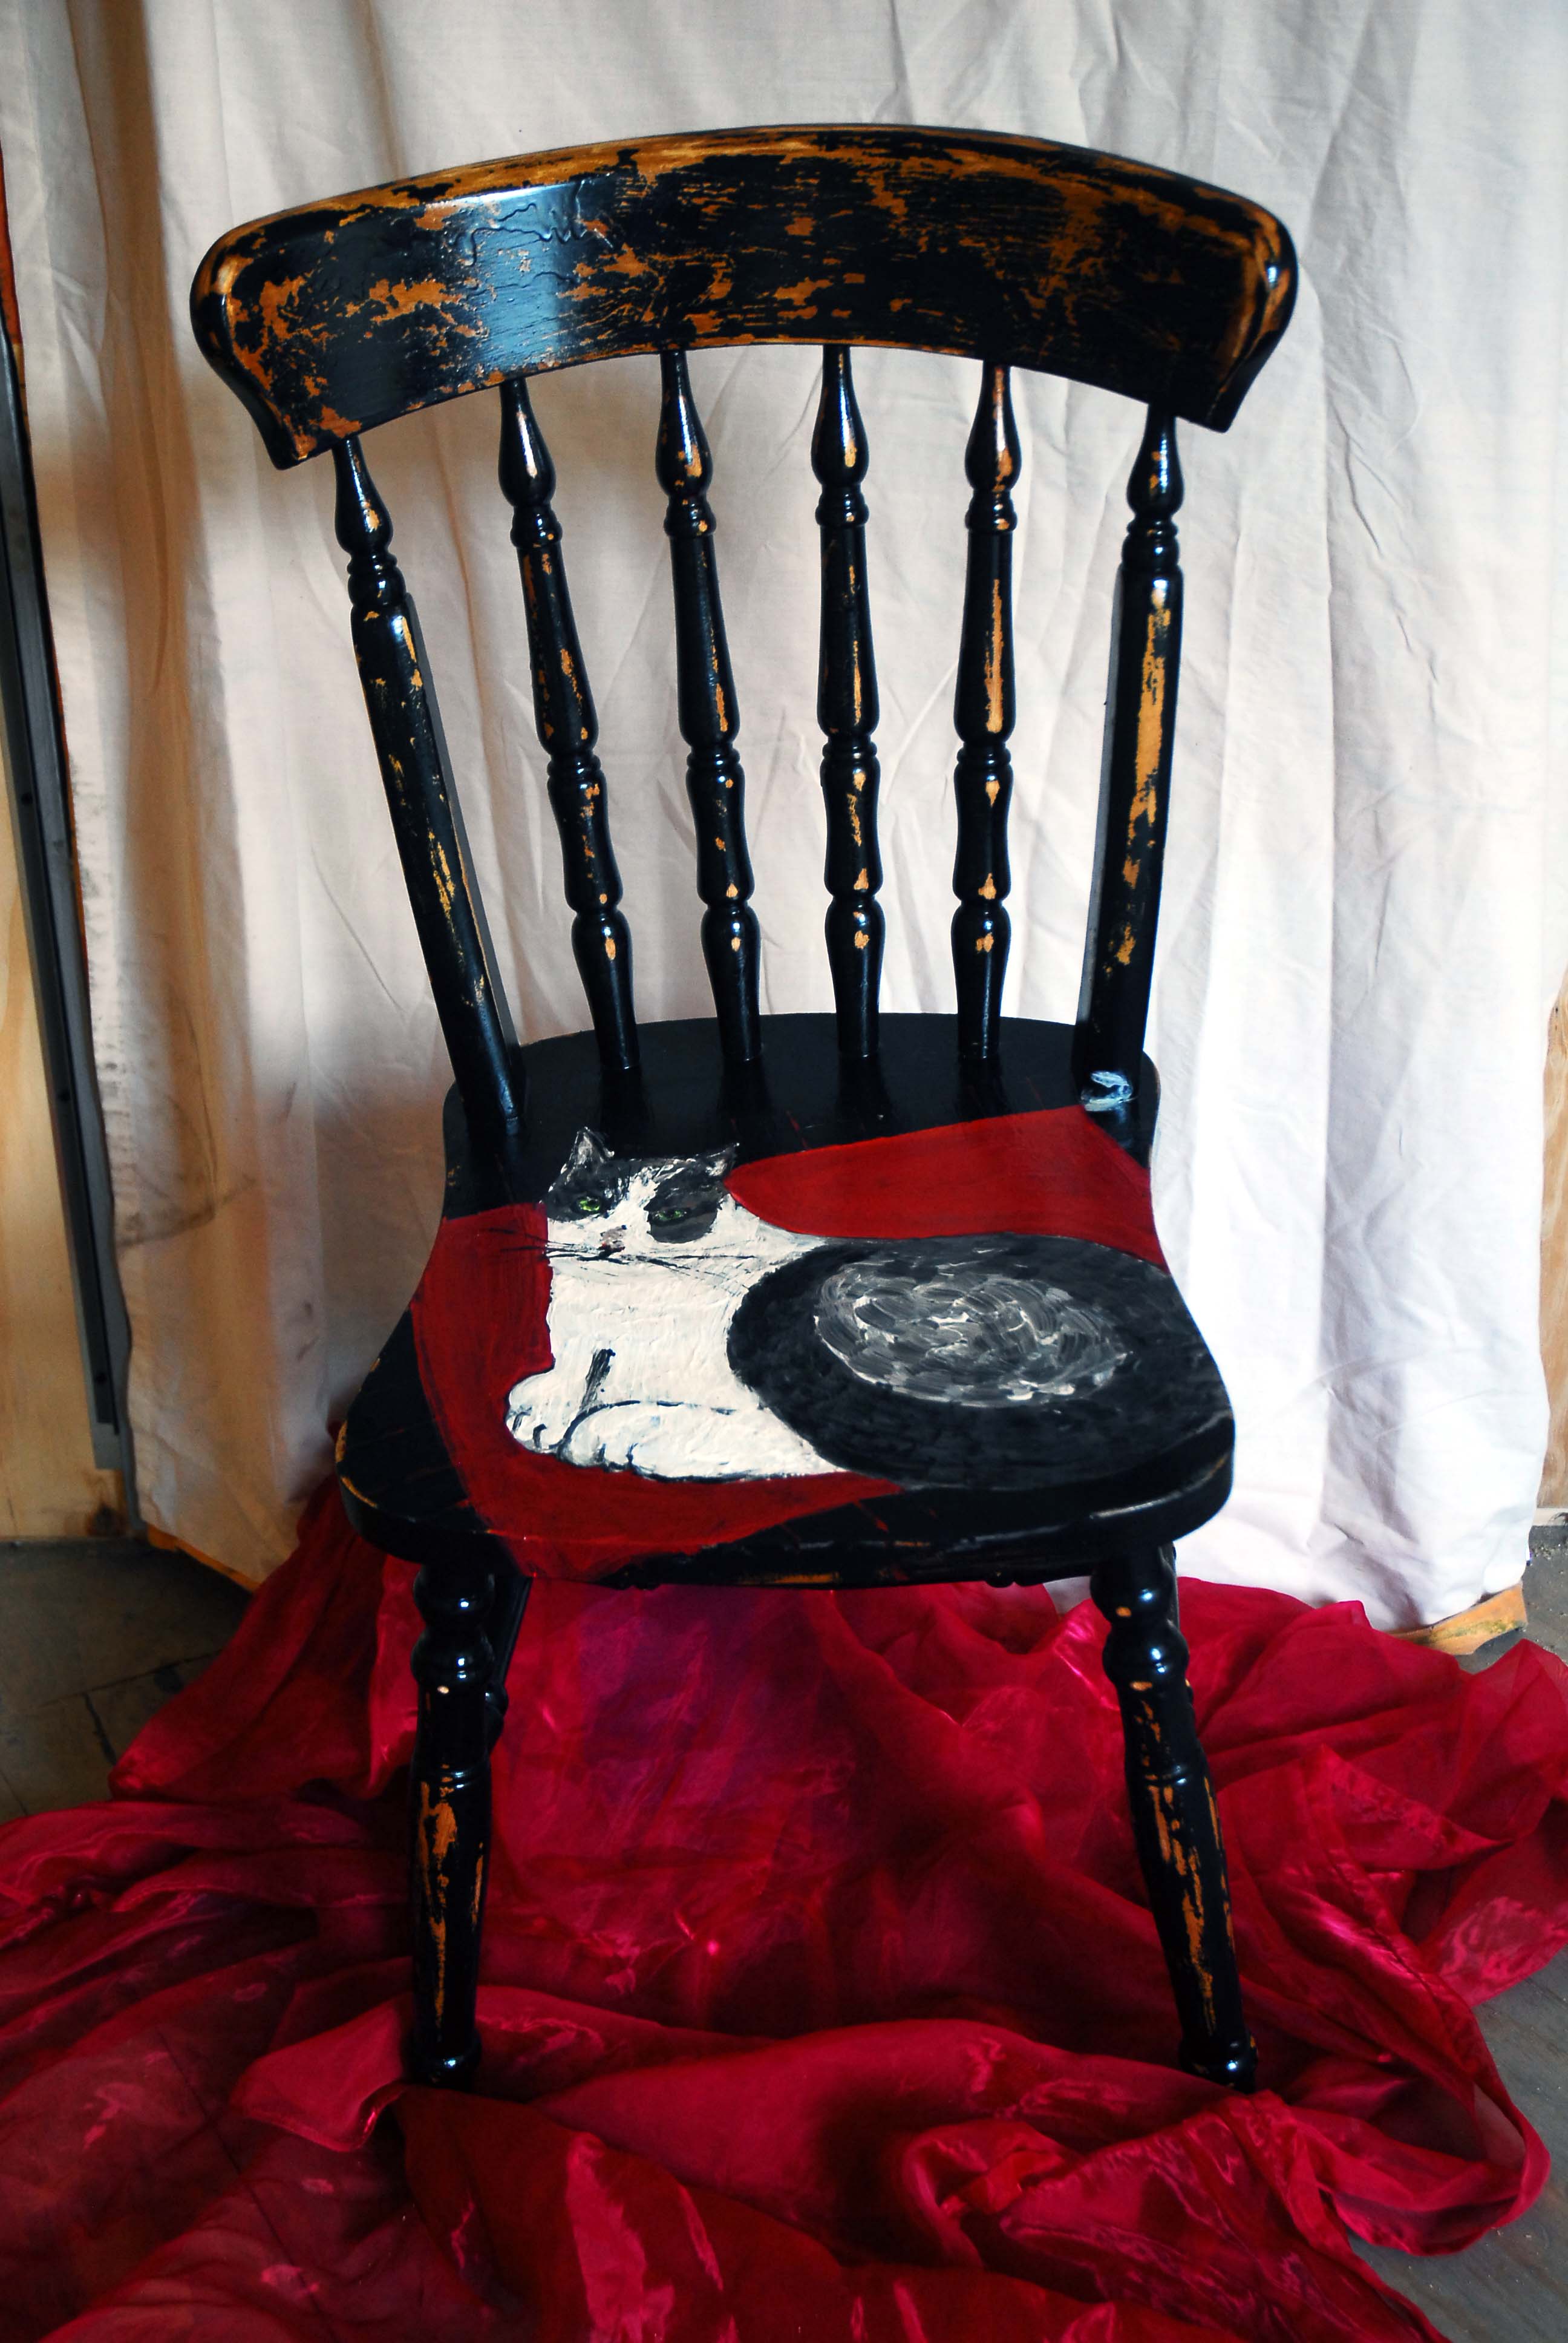 Painted cat on a chair